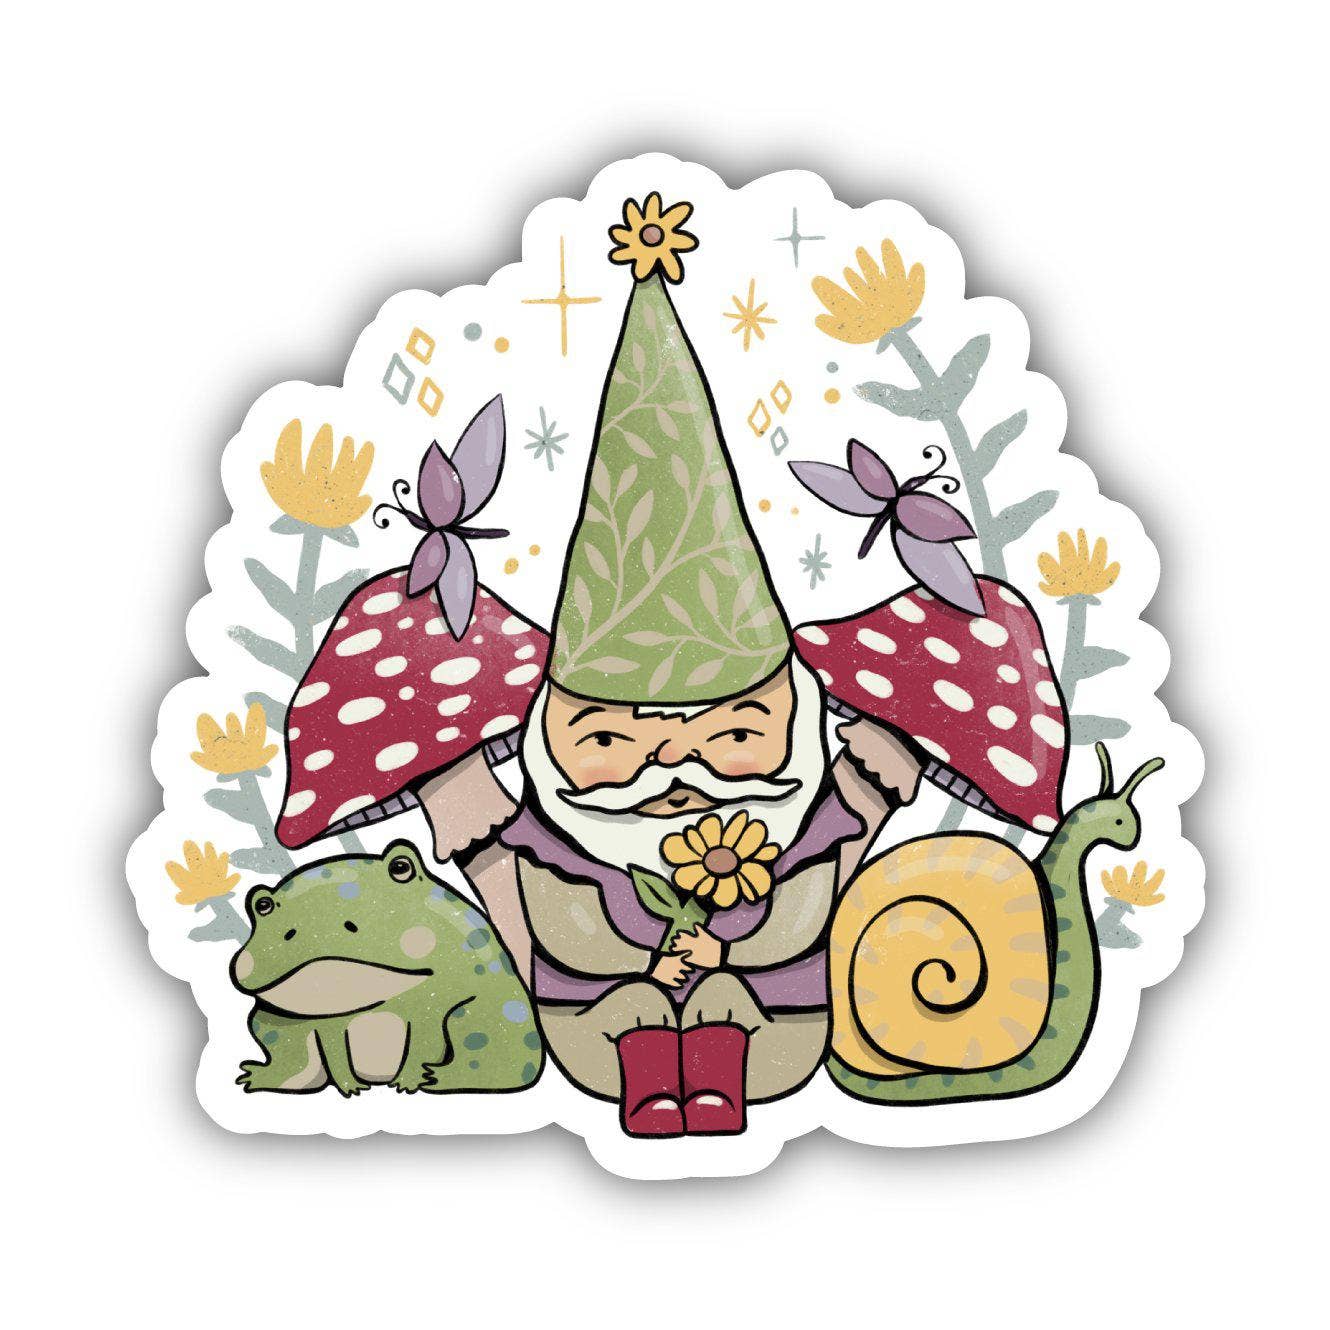 Green Elf and Frogs Fairytale Sticker - Big Moods